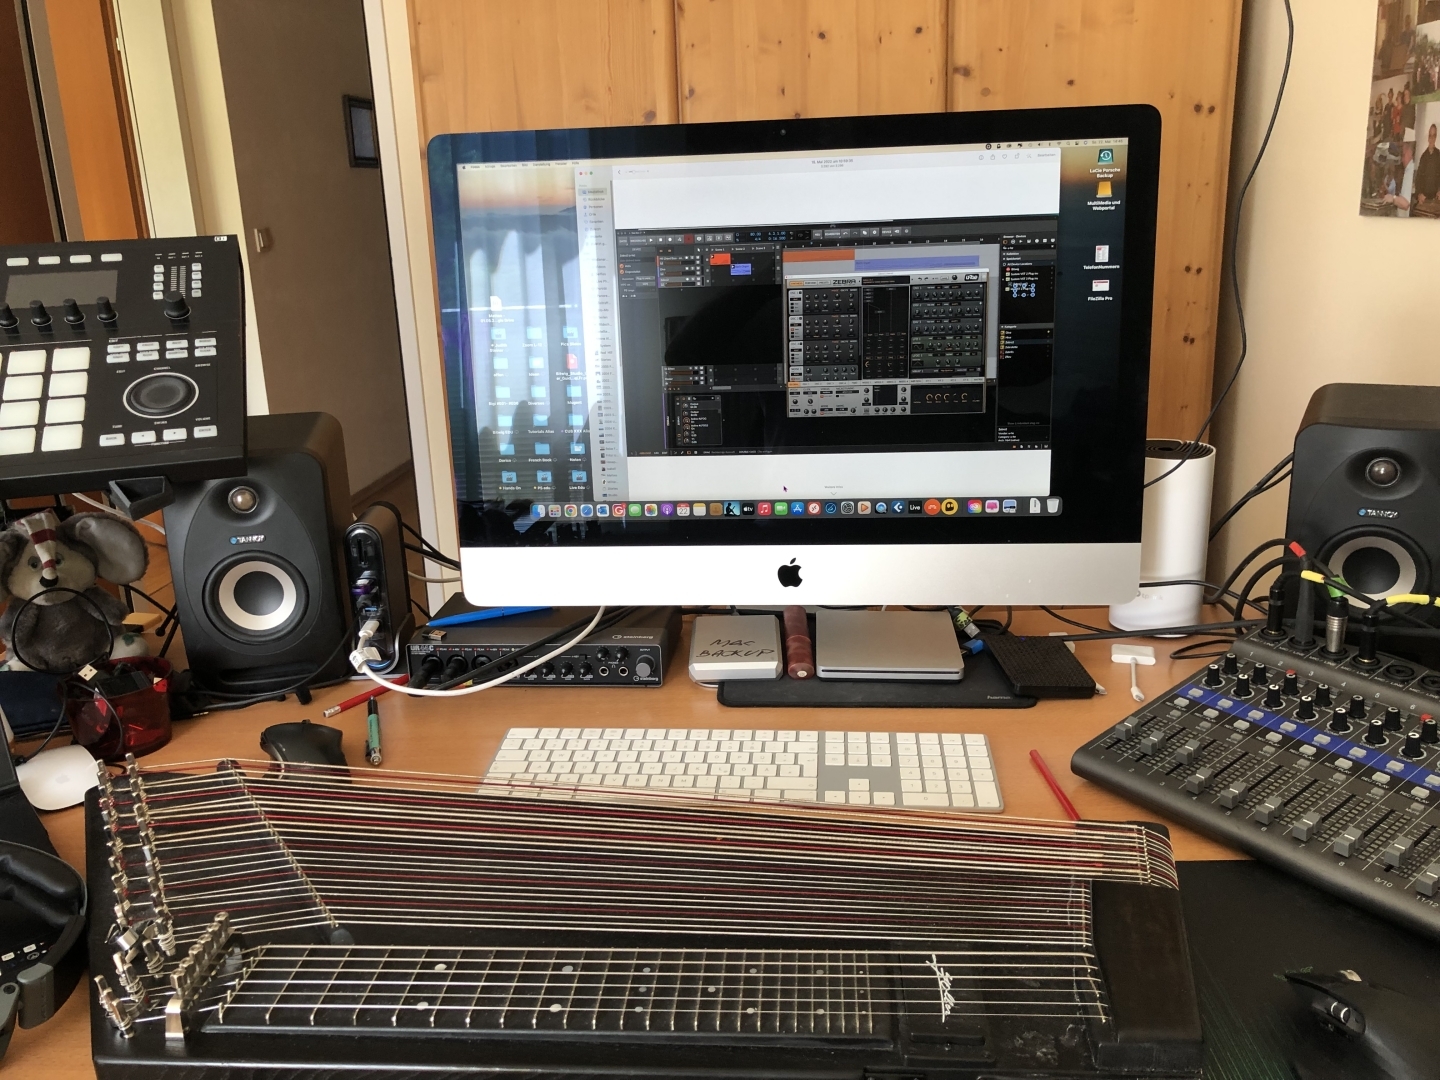 e_zither (4-channel) with DAW Bitwig 4.3
myzither.com  #citherplayer #zitherbefree